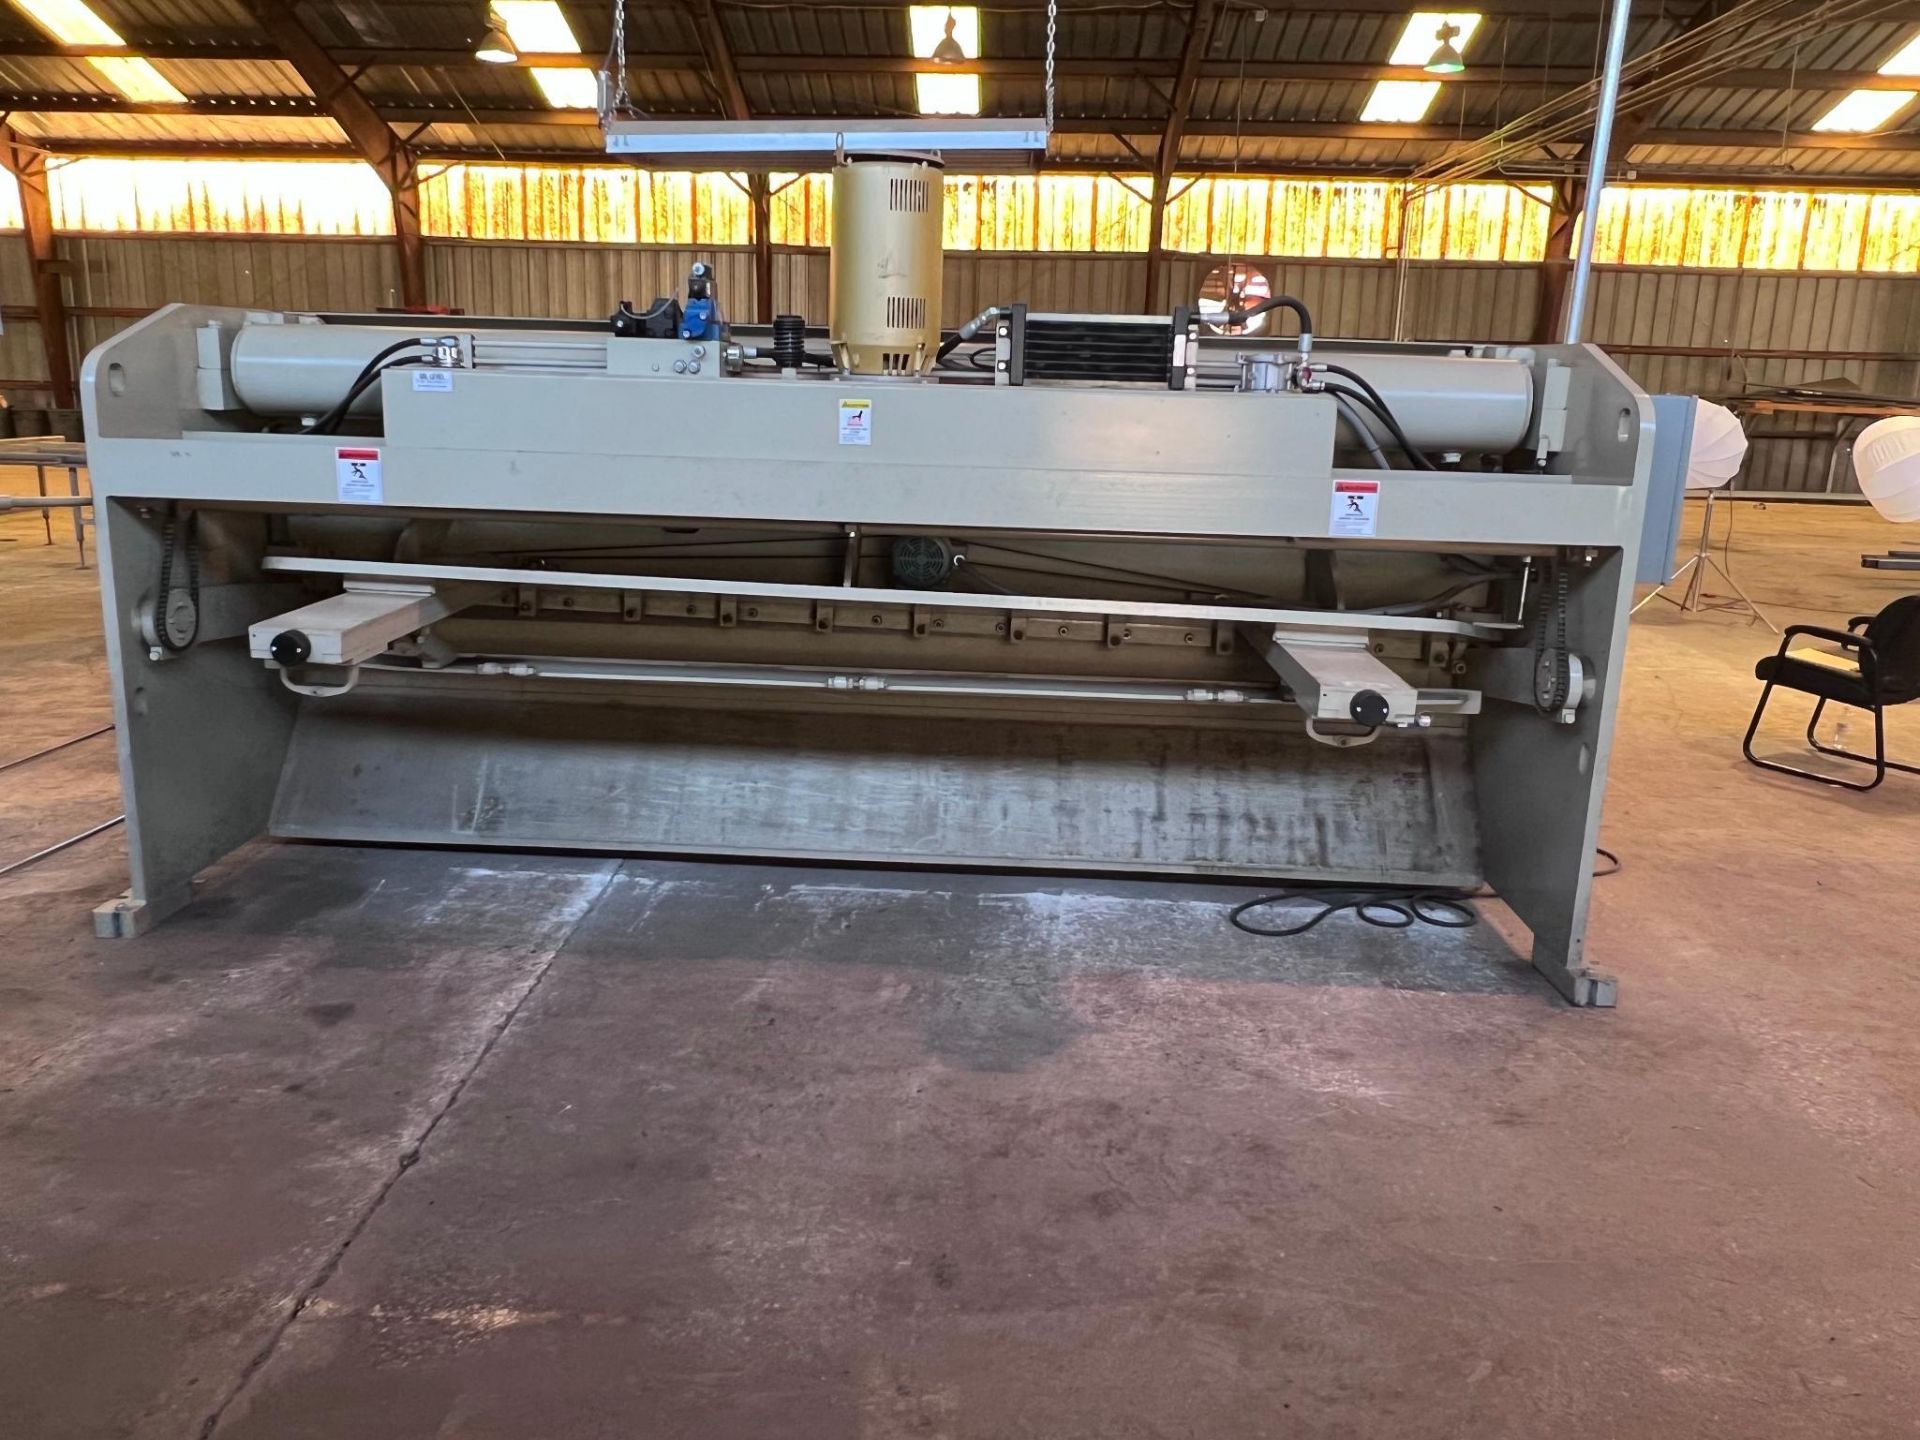 2019 Accurshear 625012 Hydraulic Power Squaring Shear Serial Number 7281 Thickness: .25" Mild Steel - Image 29 of 29